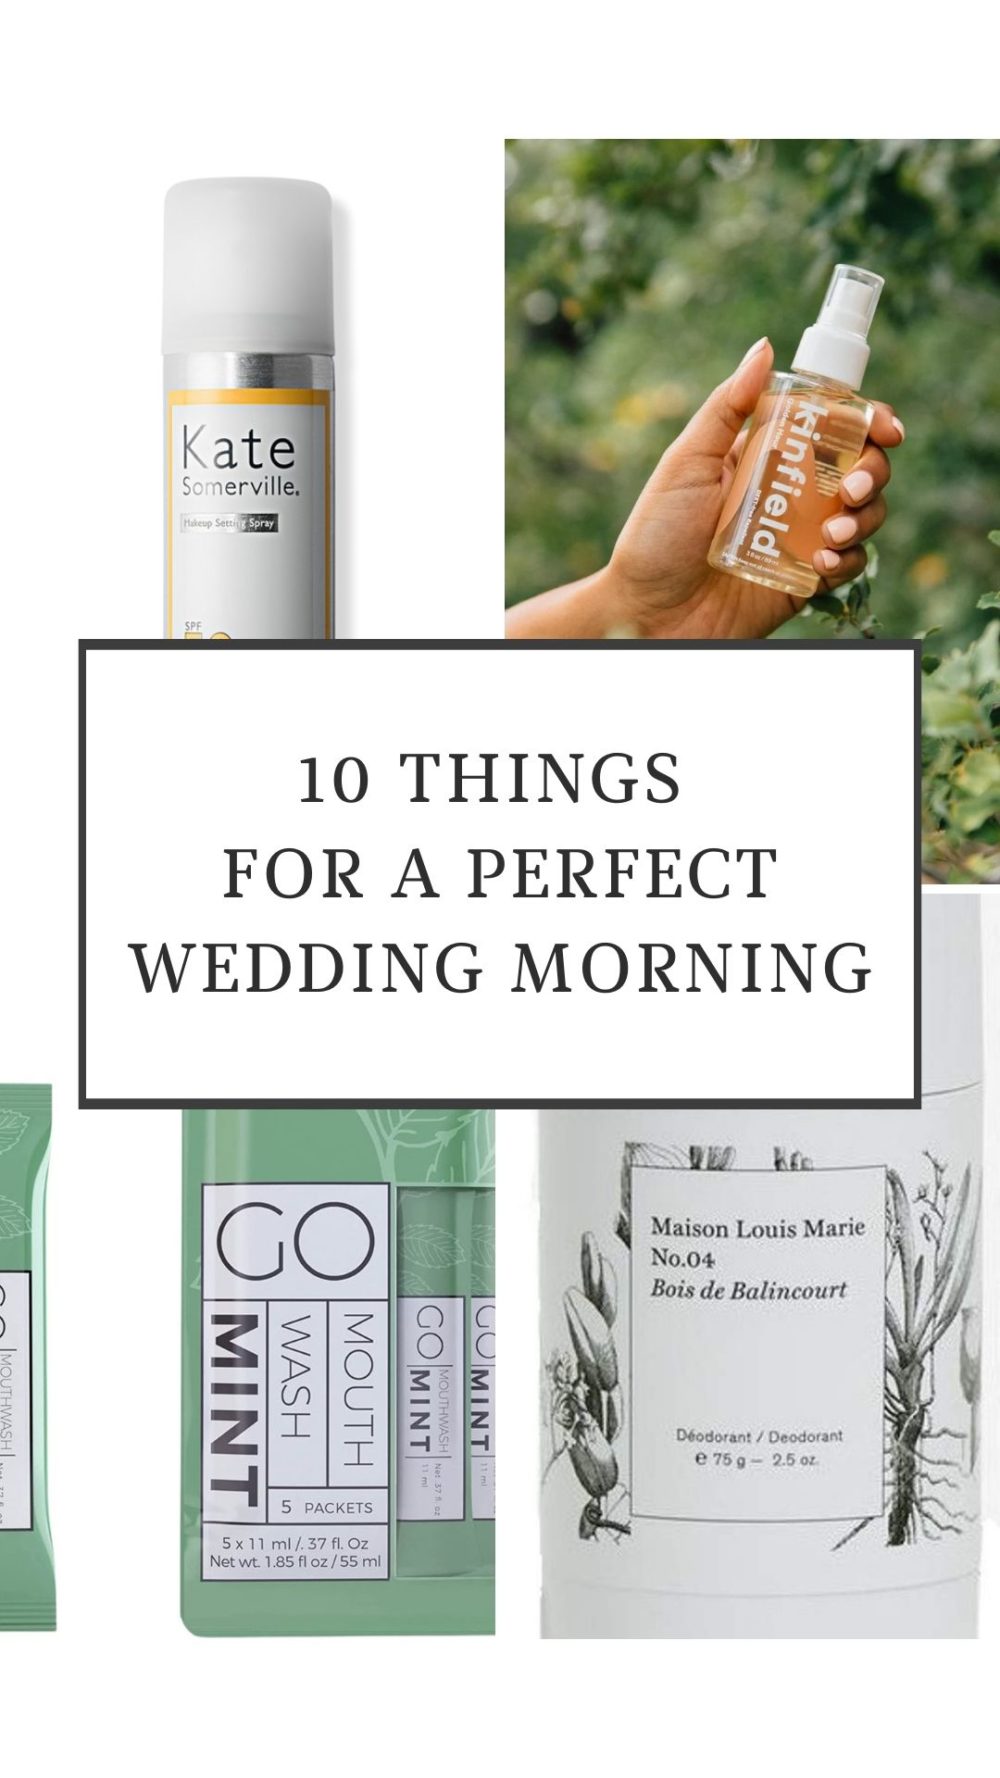 10 Things for A Perfect Wedding Morning